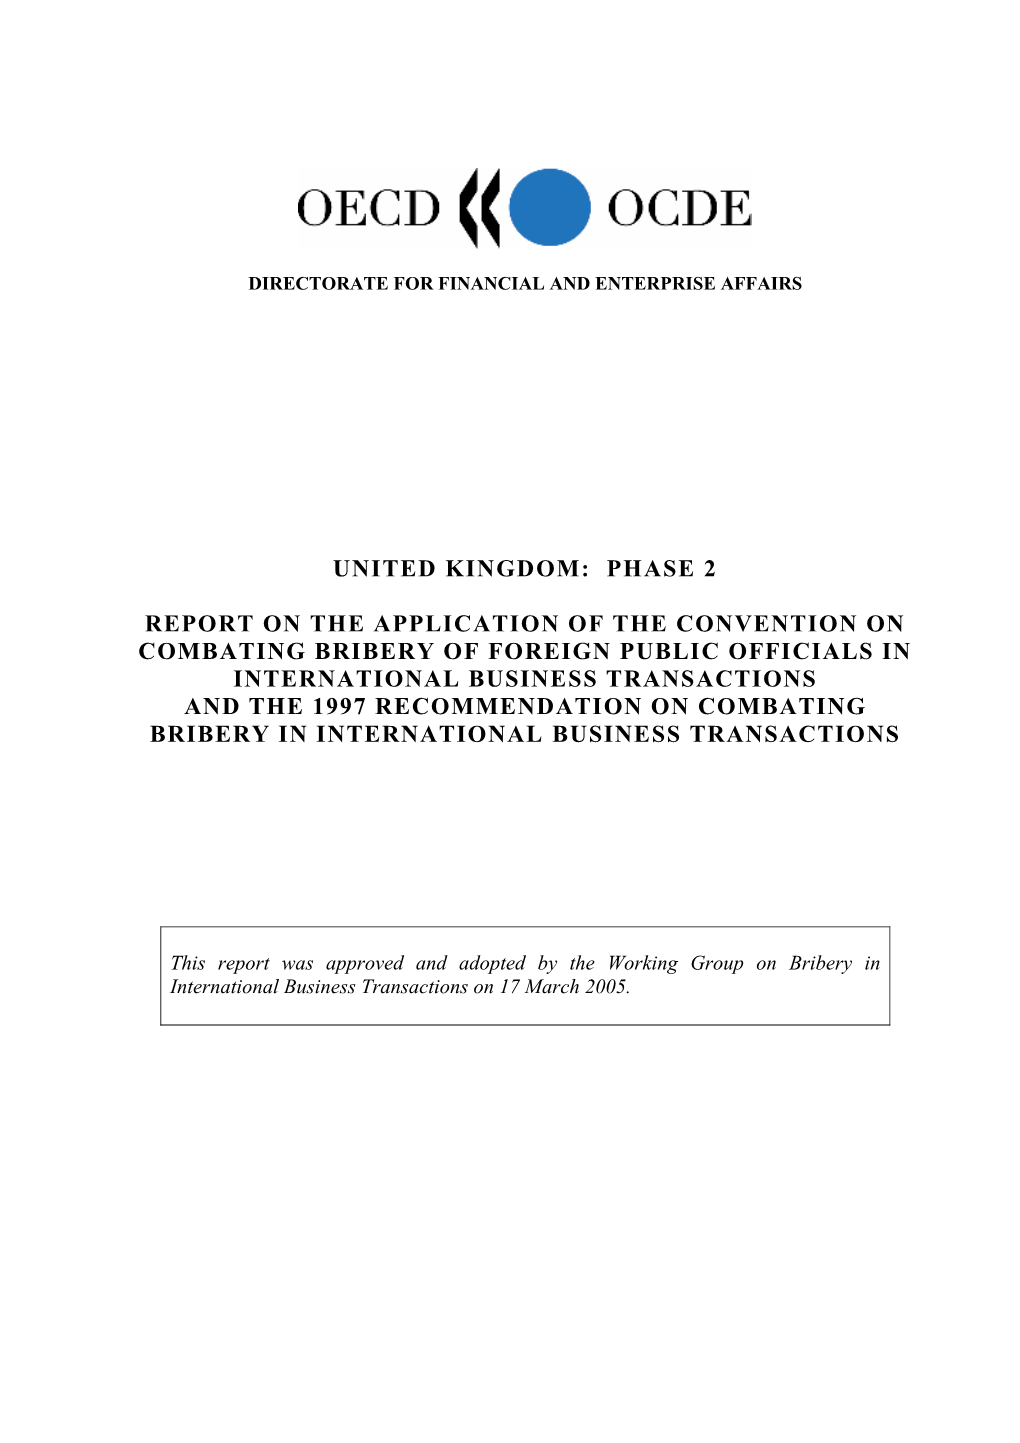 United Kingdom: Phase 2 Report on the Application of the Convention On